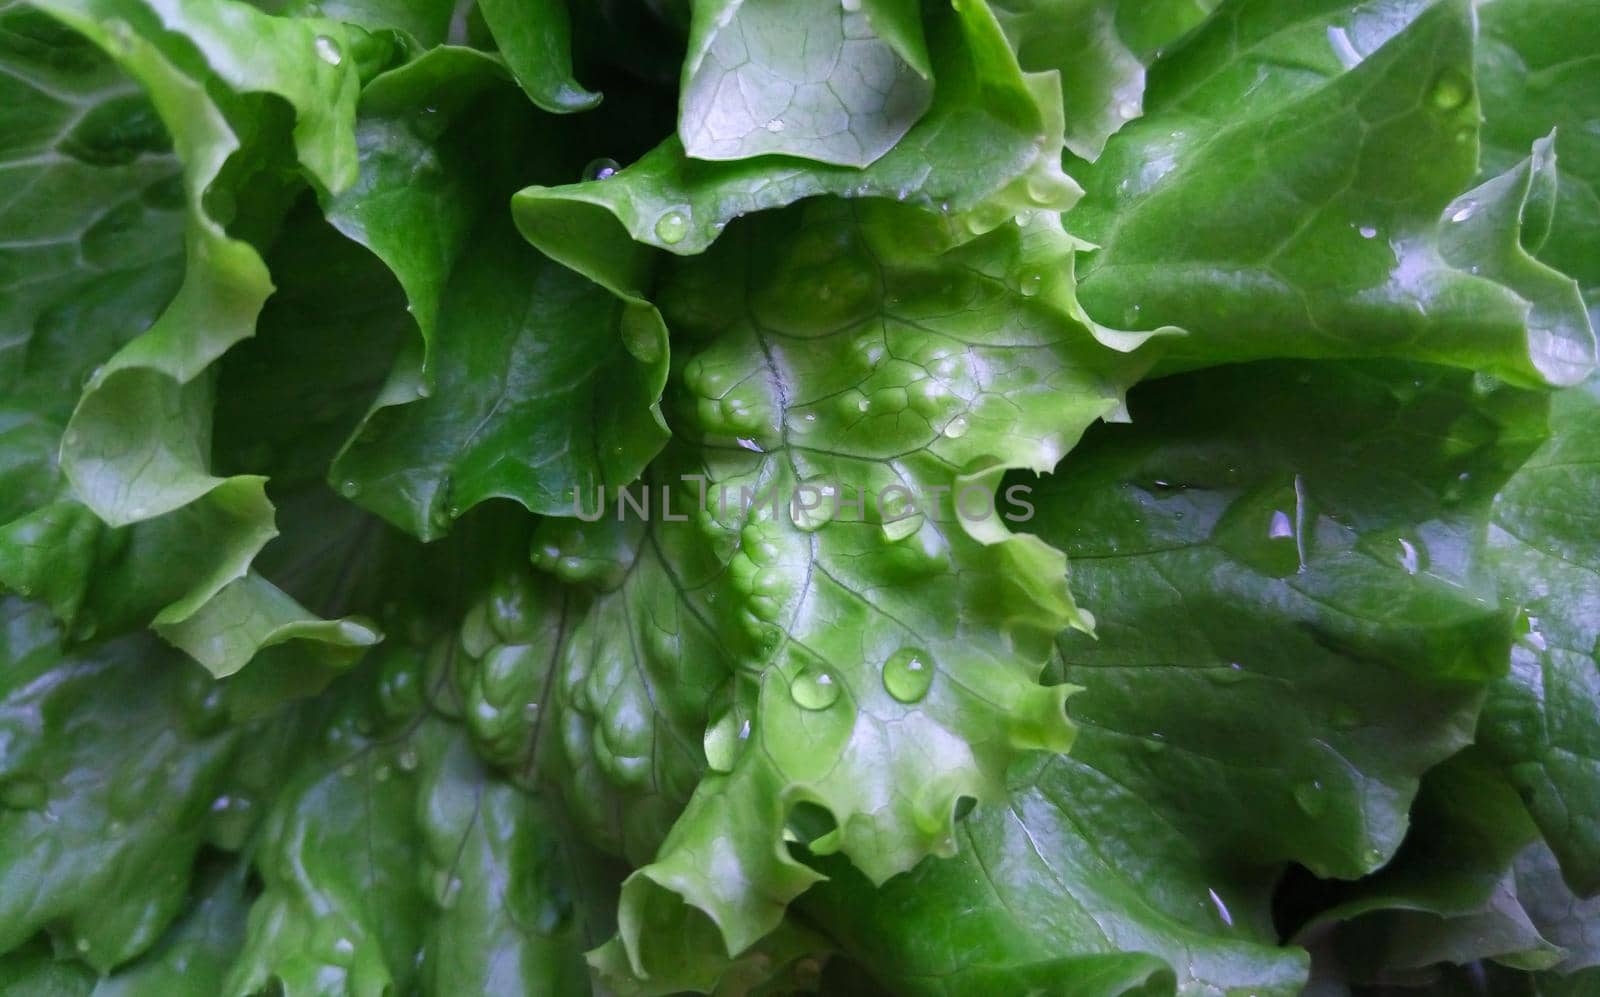 Green lettuce salad leaves and water drops close up image. by lapushka62